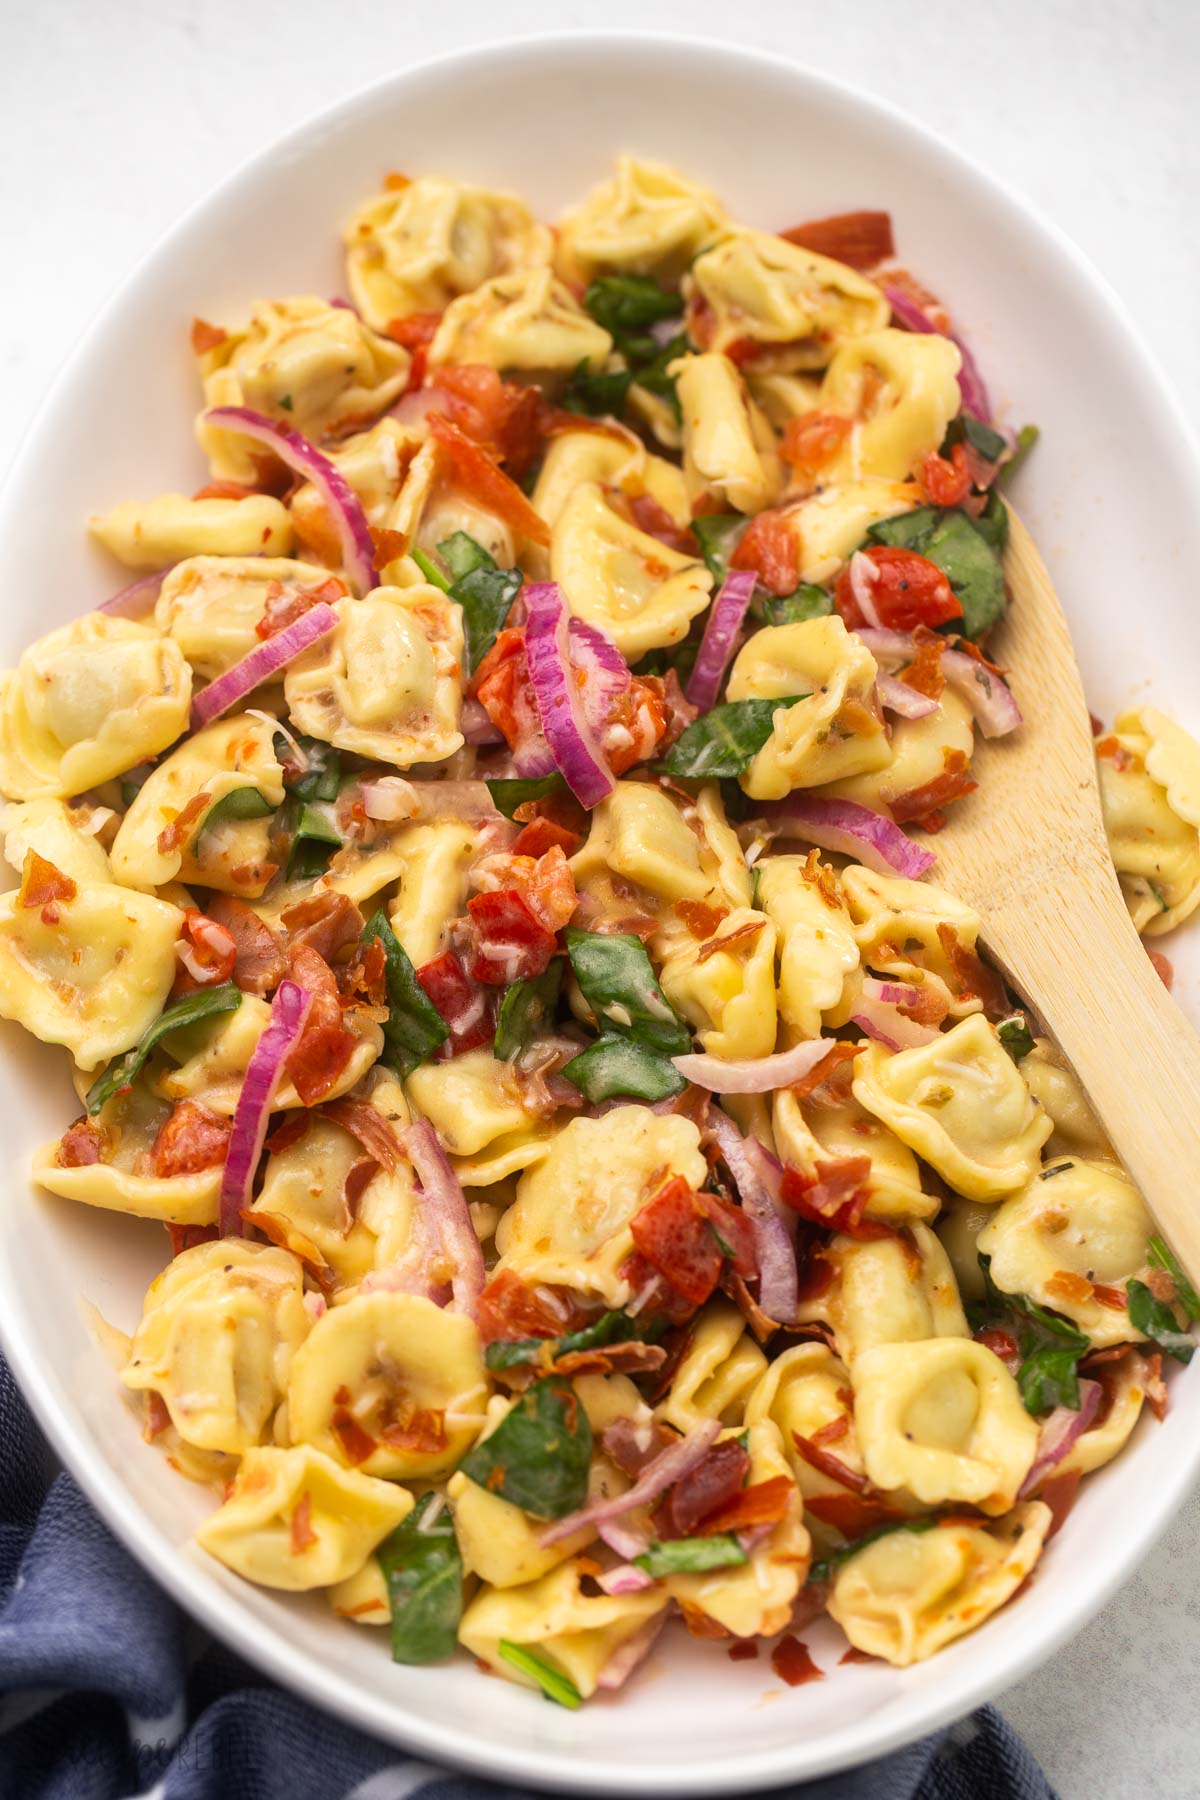 platter of tortellini pasta salad with wooden ladle in it.